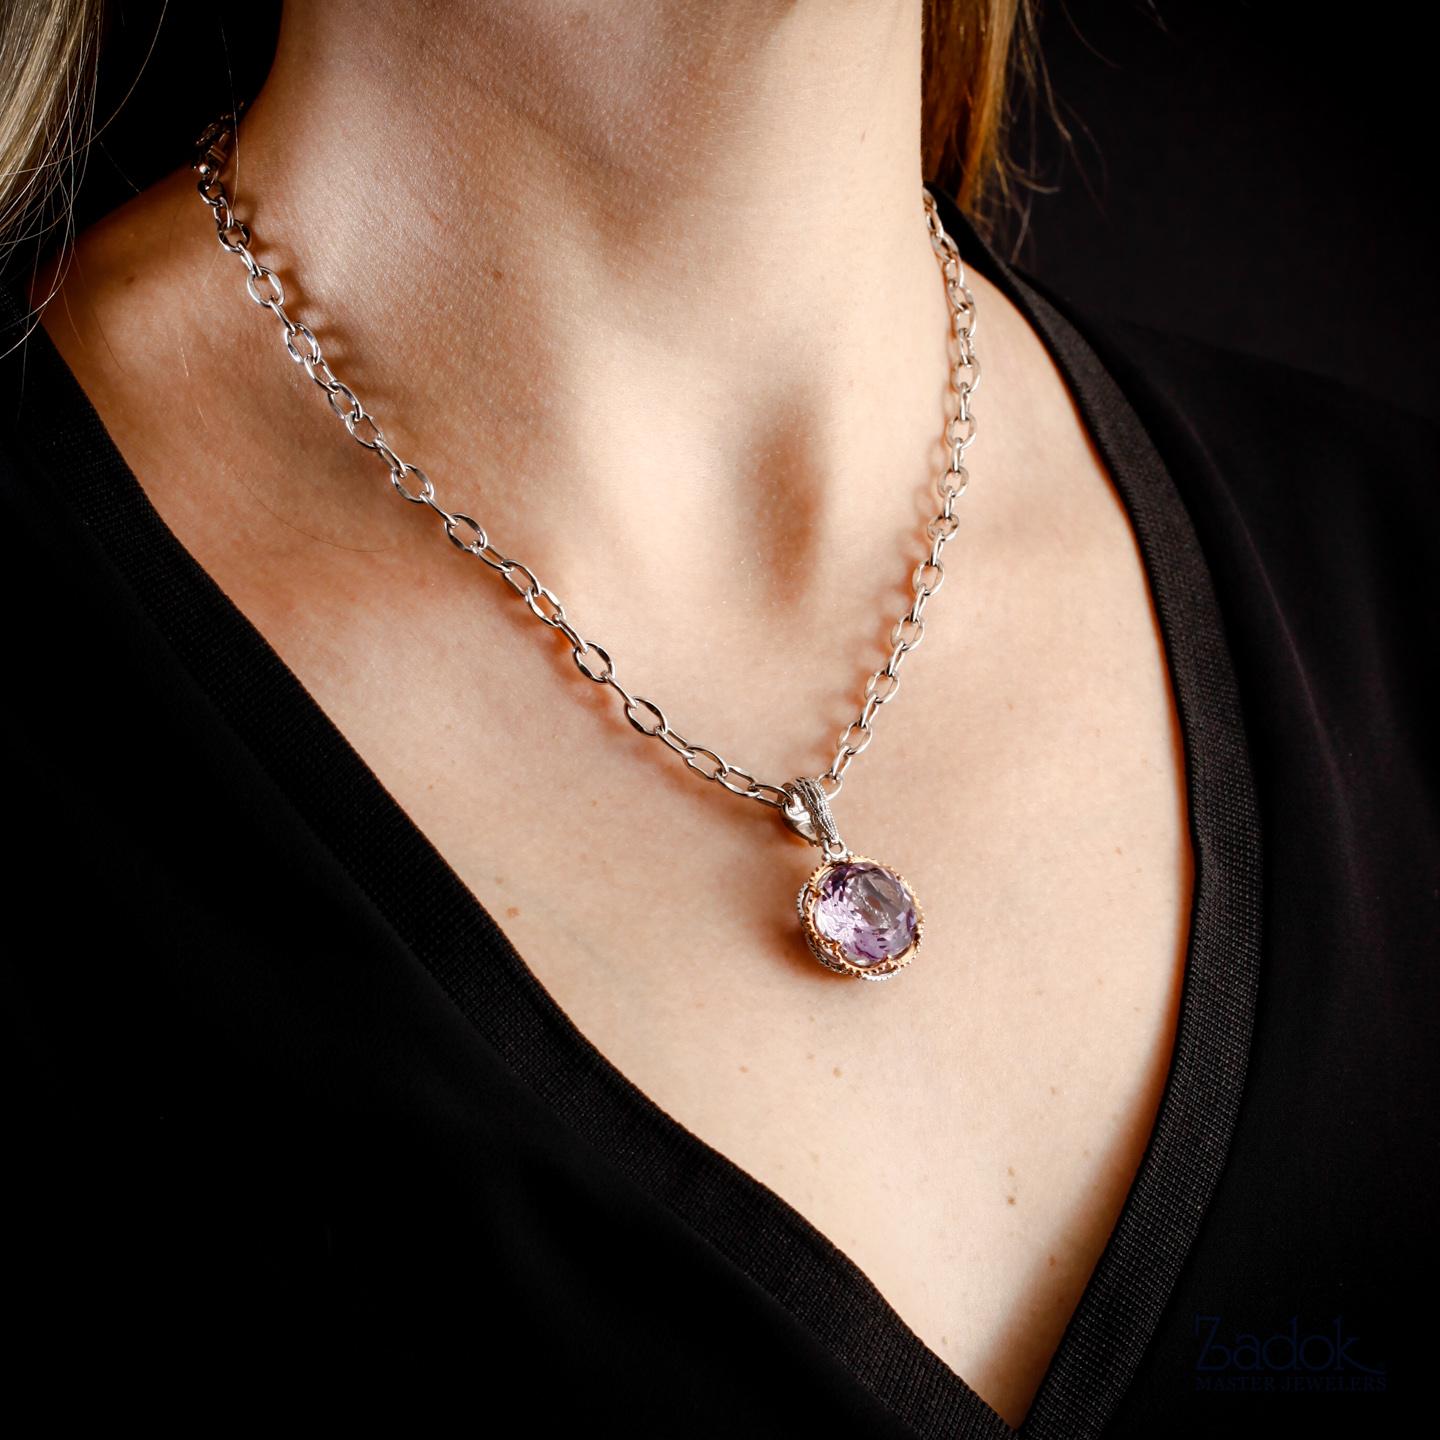 This Tacori pendant contains and amethyst set in sterling silver and 18k rose gold on an 18 inch sterling silver chain. This necklace is in excellent condition and has never been worn. 